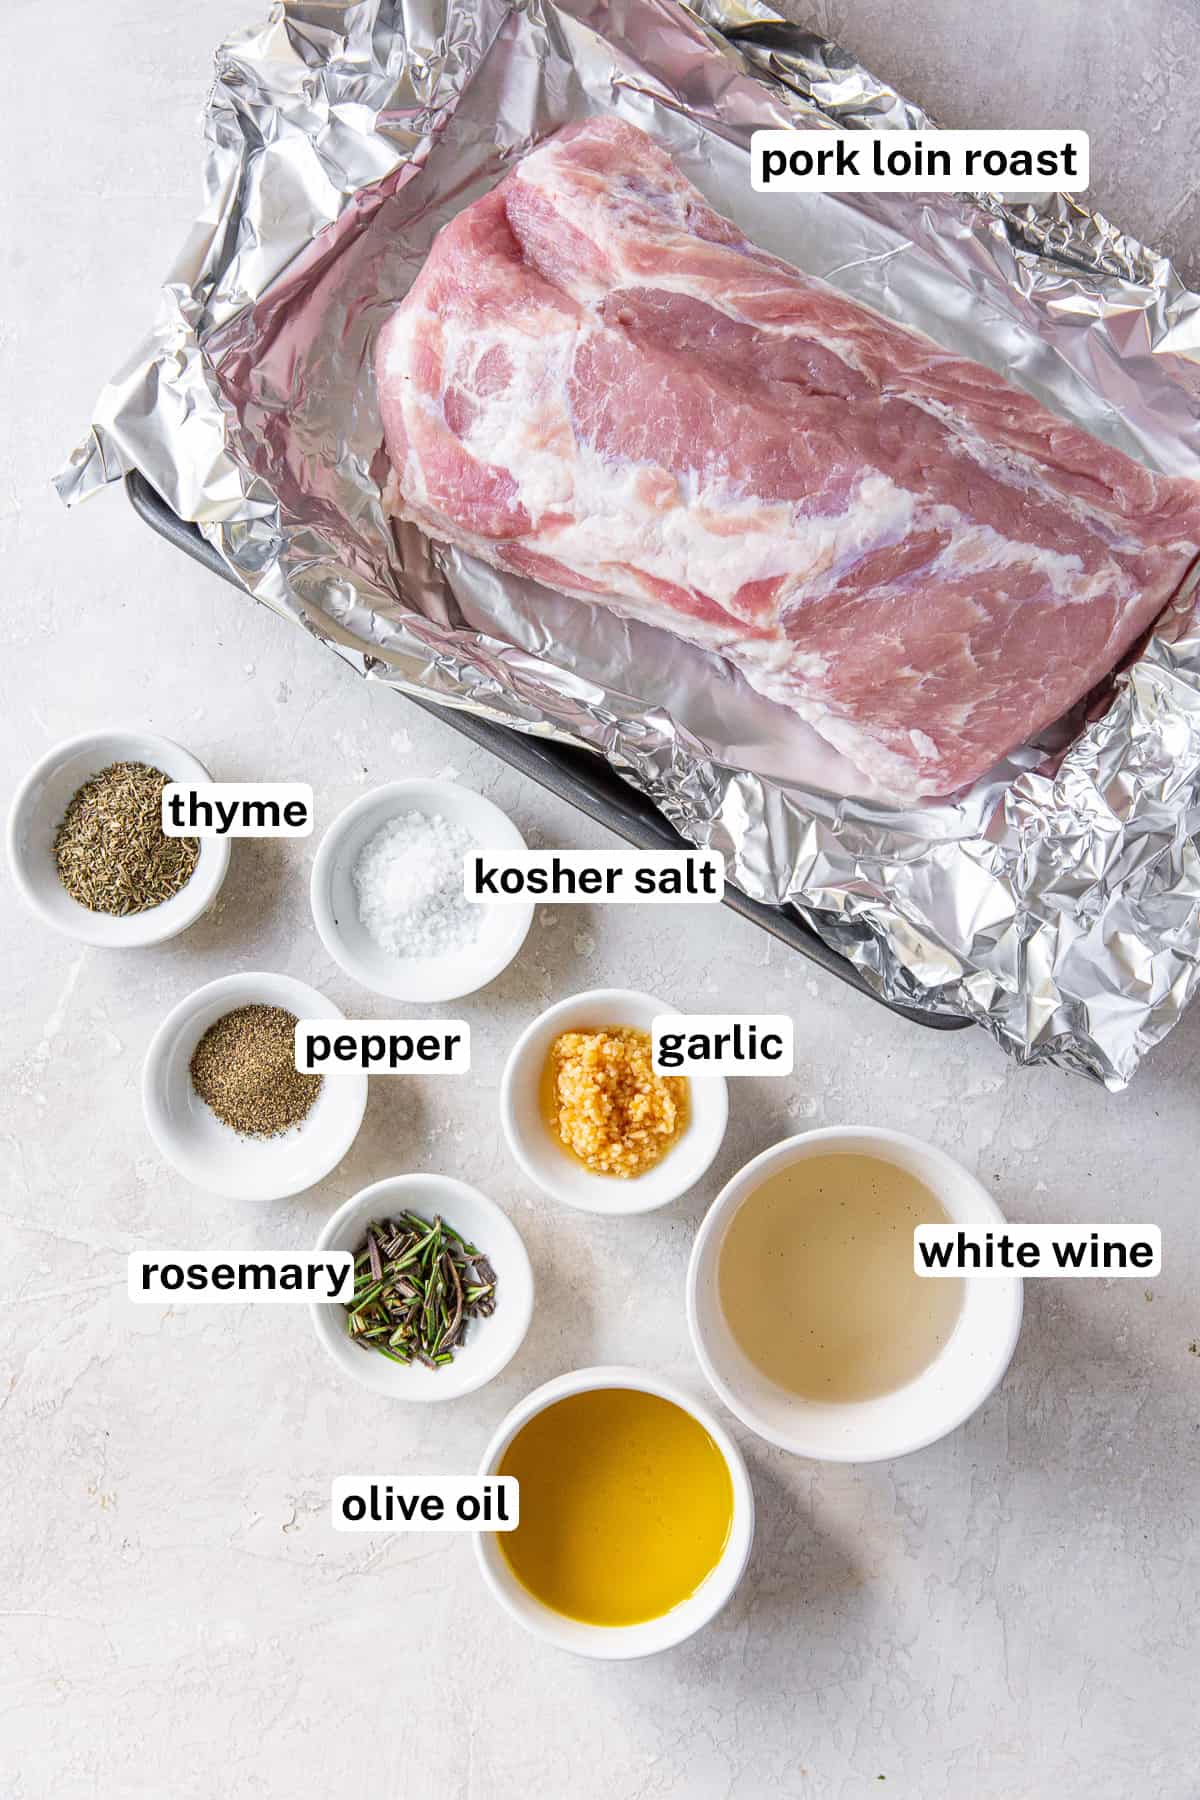 Ingredients for pork loin roast with text.